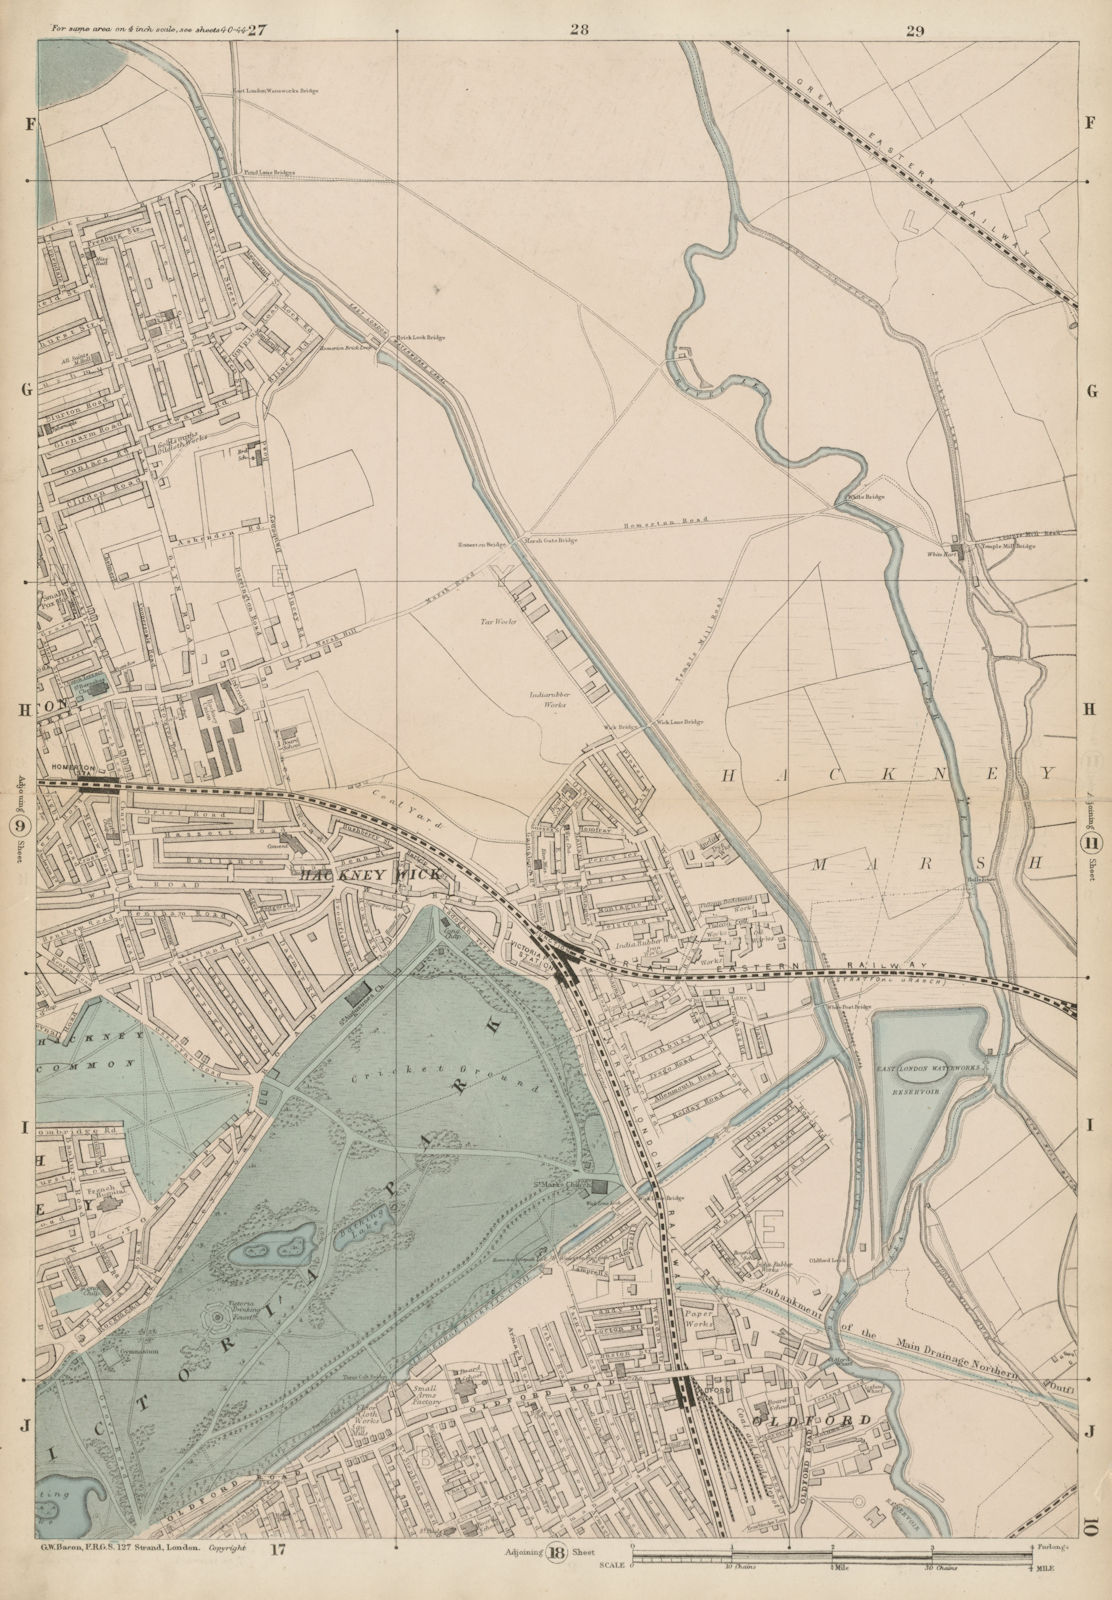 Associate Product HACKNEY WICK/Marshes Victoria Park Old Ford Homerton Clapton Leyton c1887 map